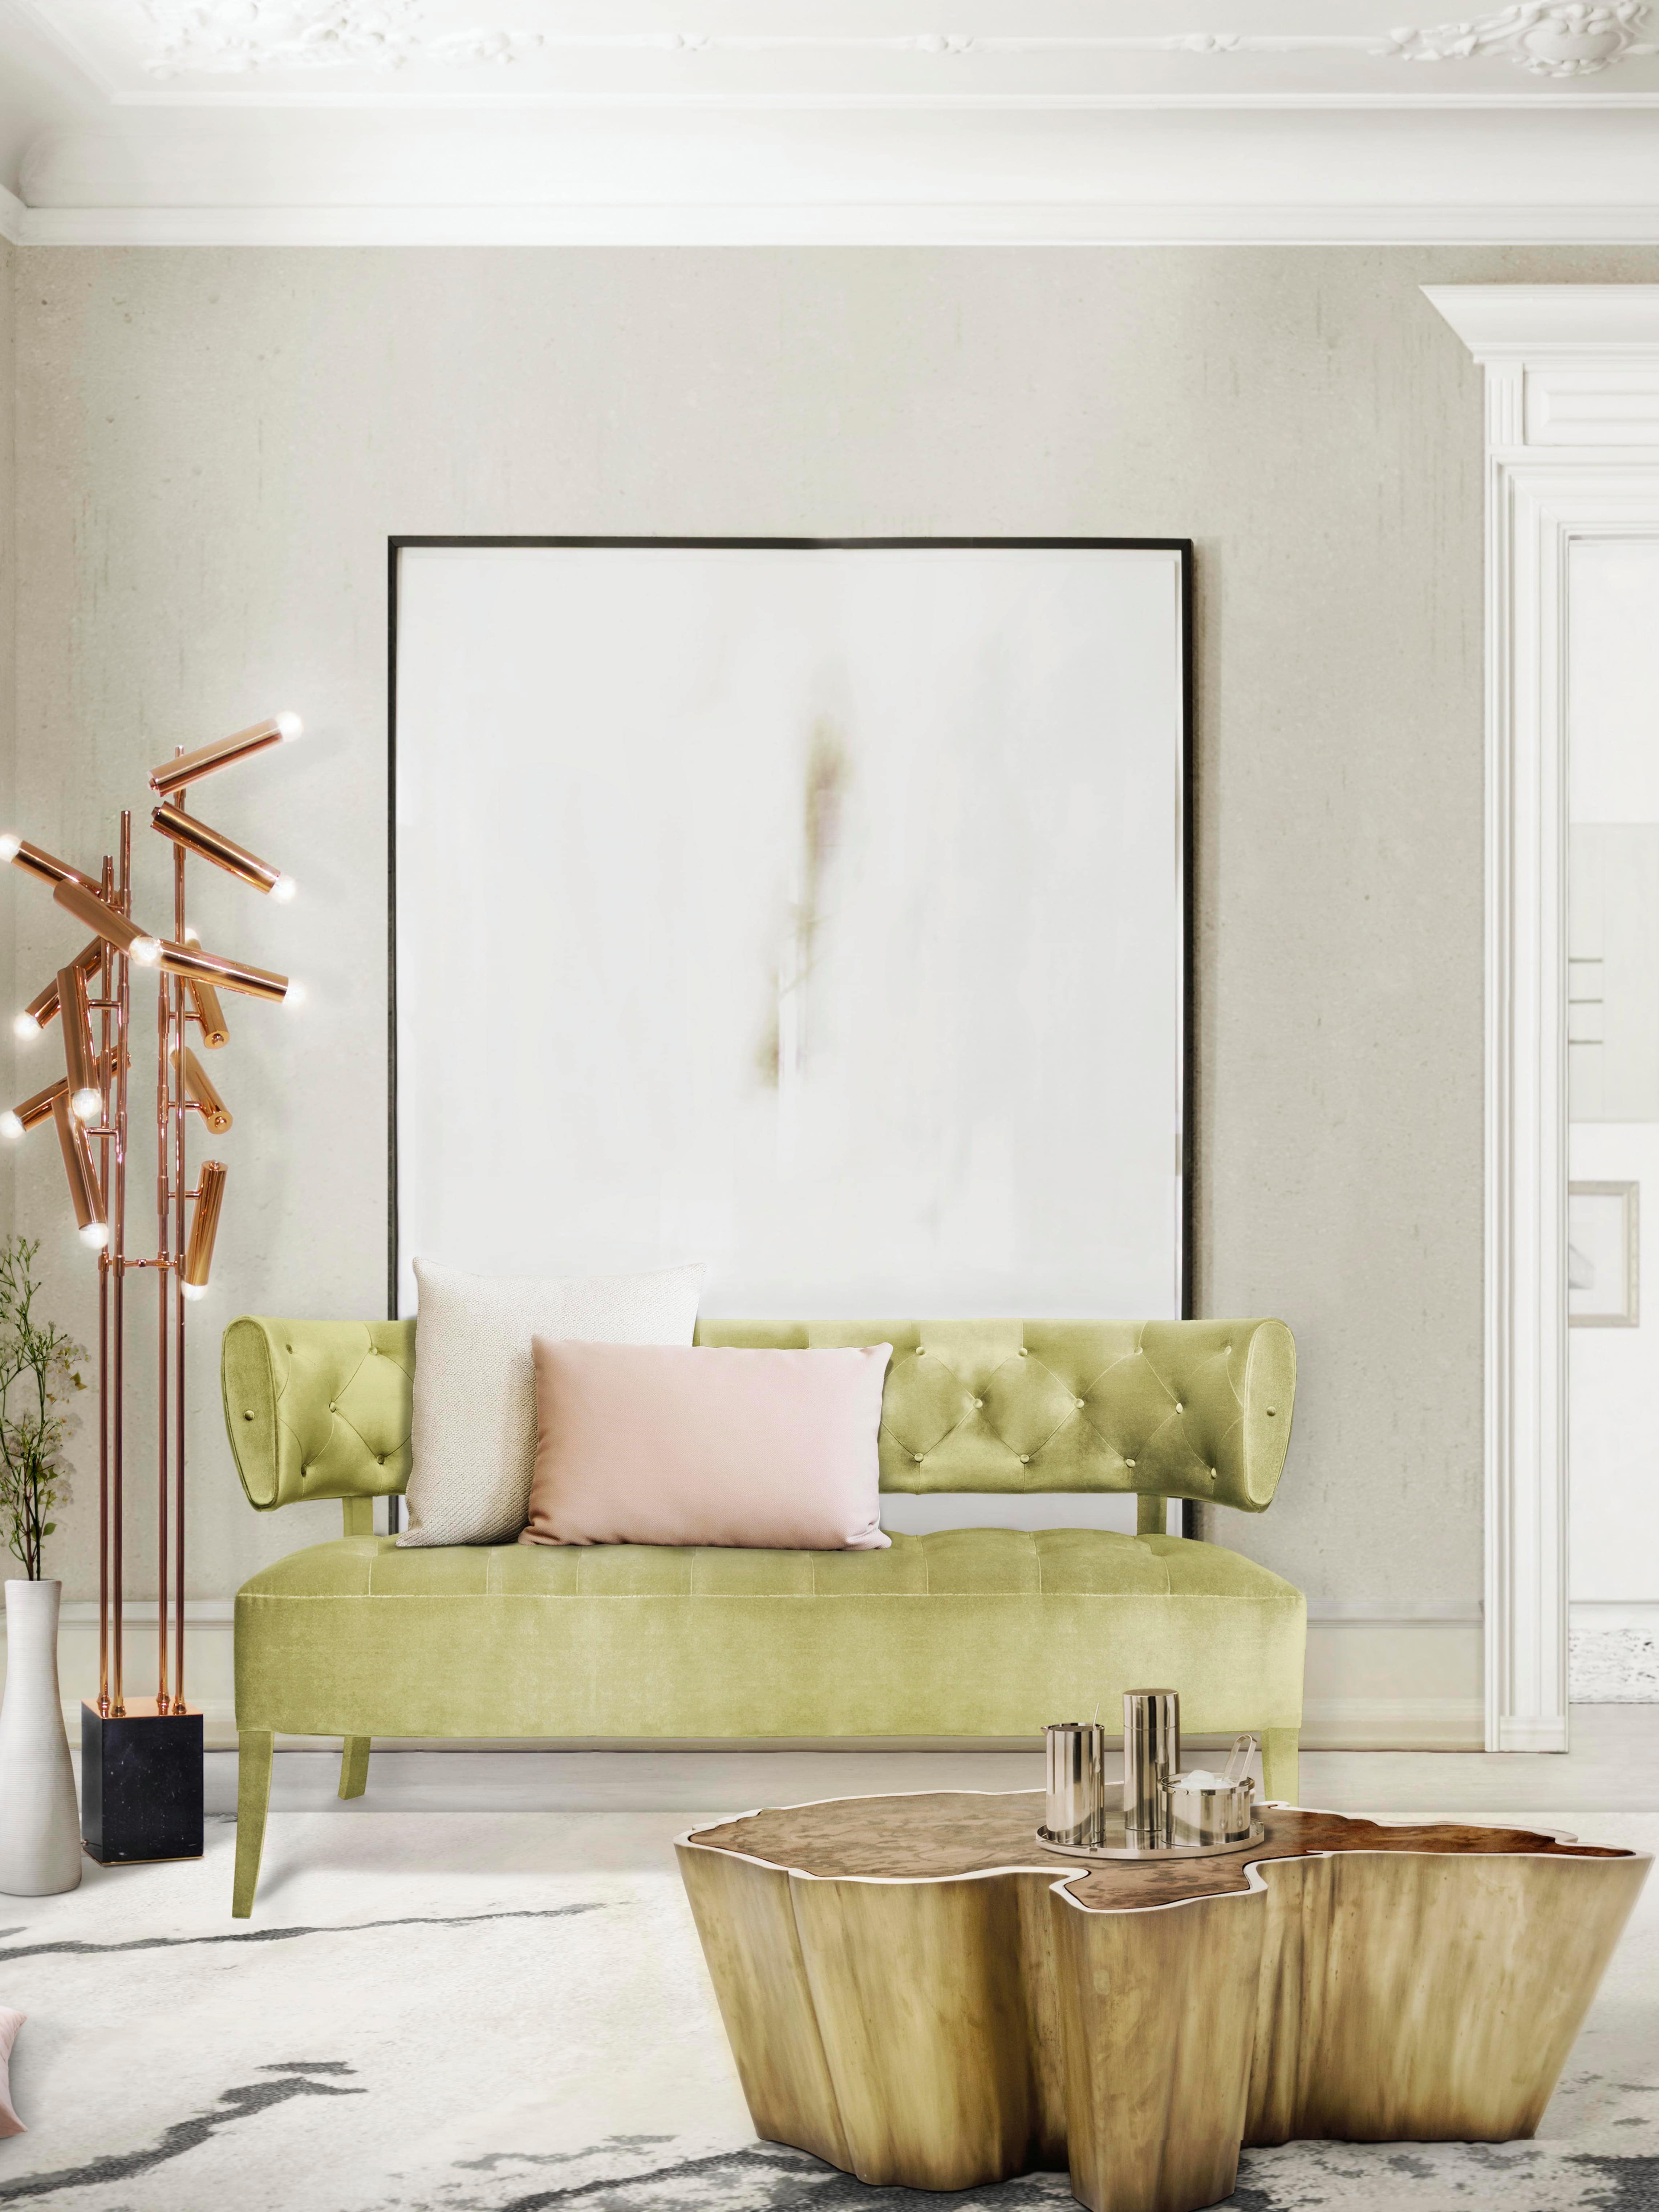 Light Living Room Interior Design With Lime Green Sofa - Home'Society